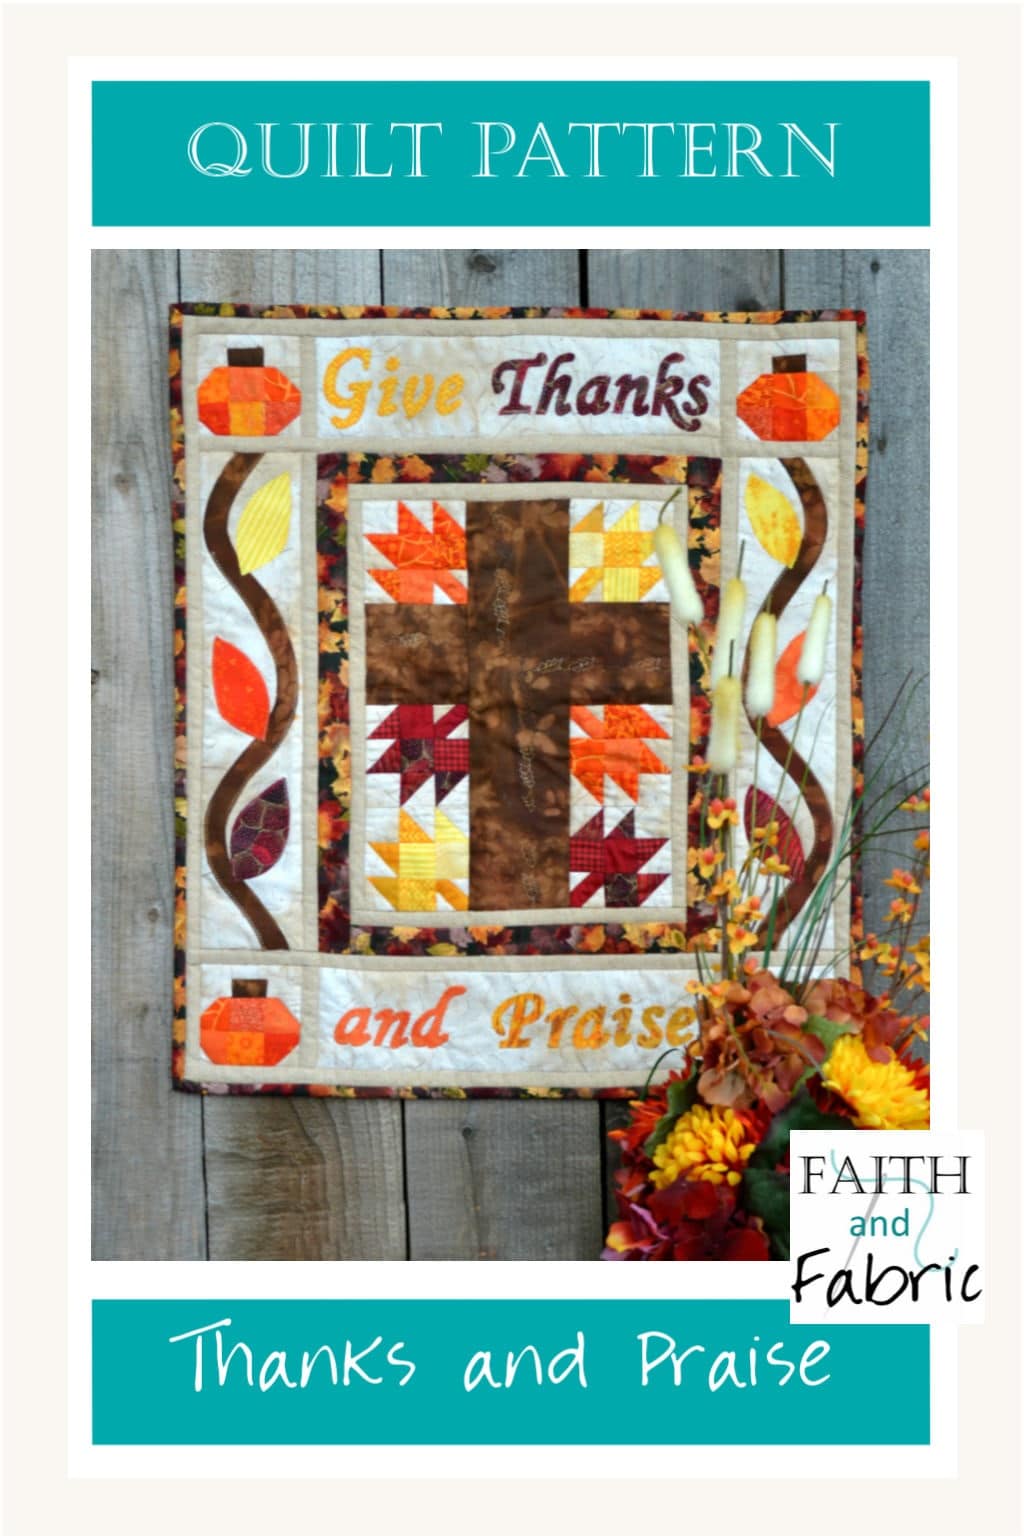 This Christian cross quilt celebrates all that we have to be thankful for! The warm colors in this Thanksgiving quilt pattern bring the fall indoors, and the cross quilt pattern is the perfect wall hanging size. Pattern designed by Faith and Fabric.